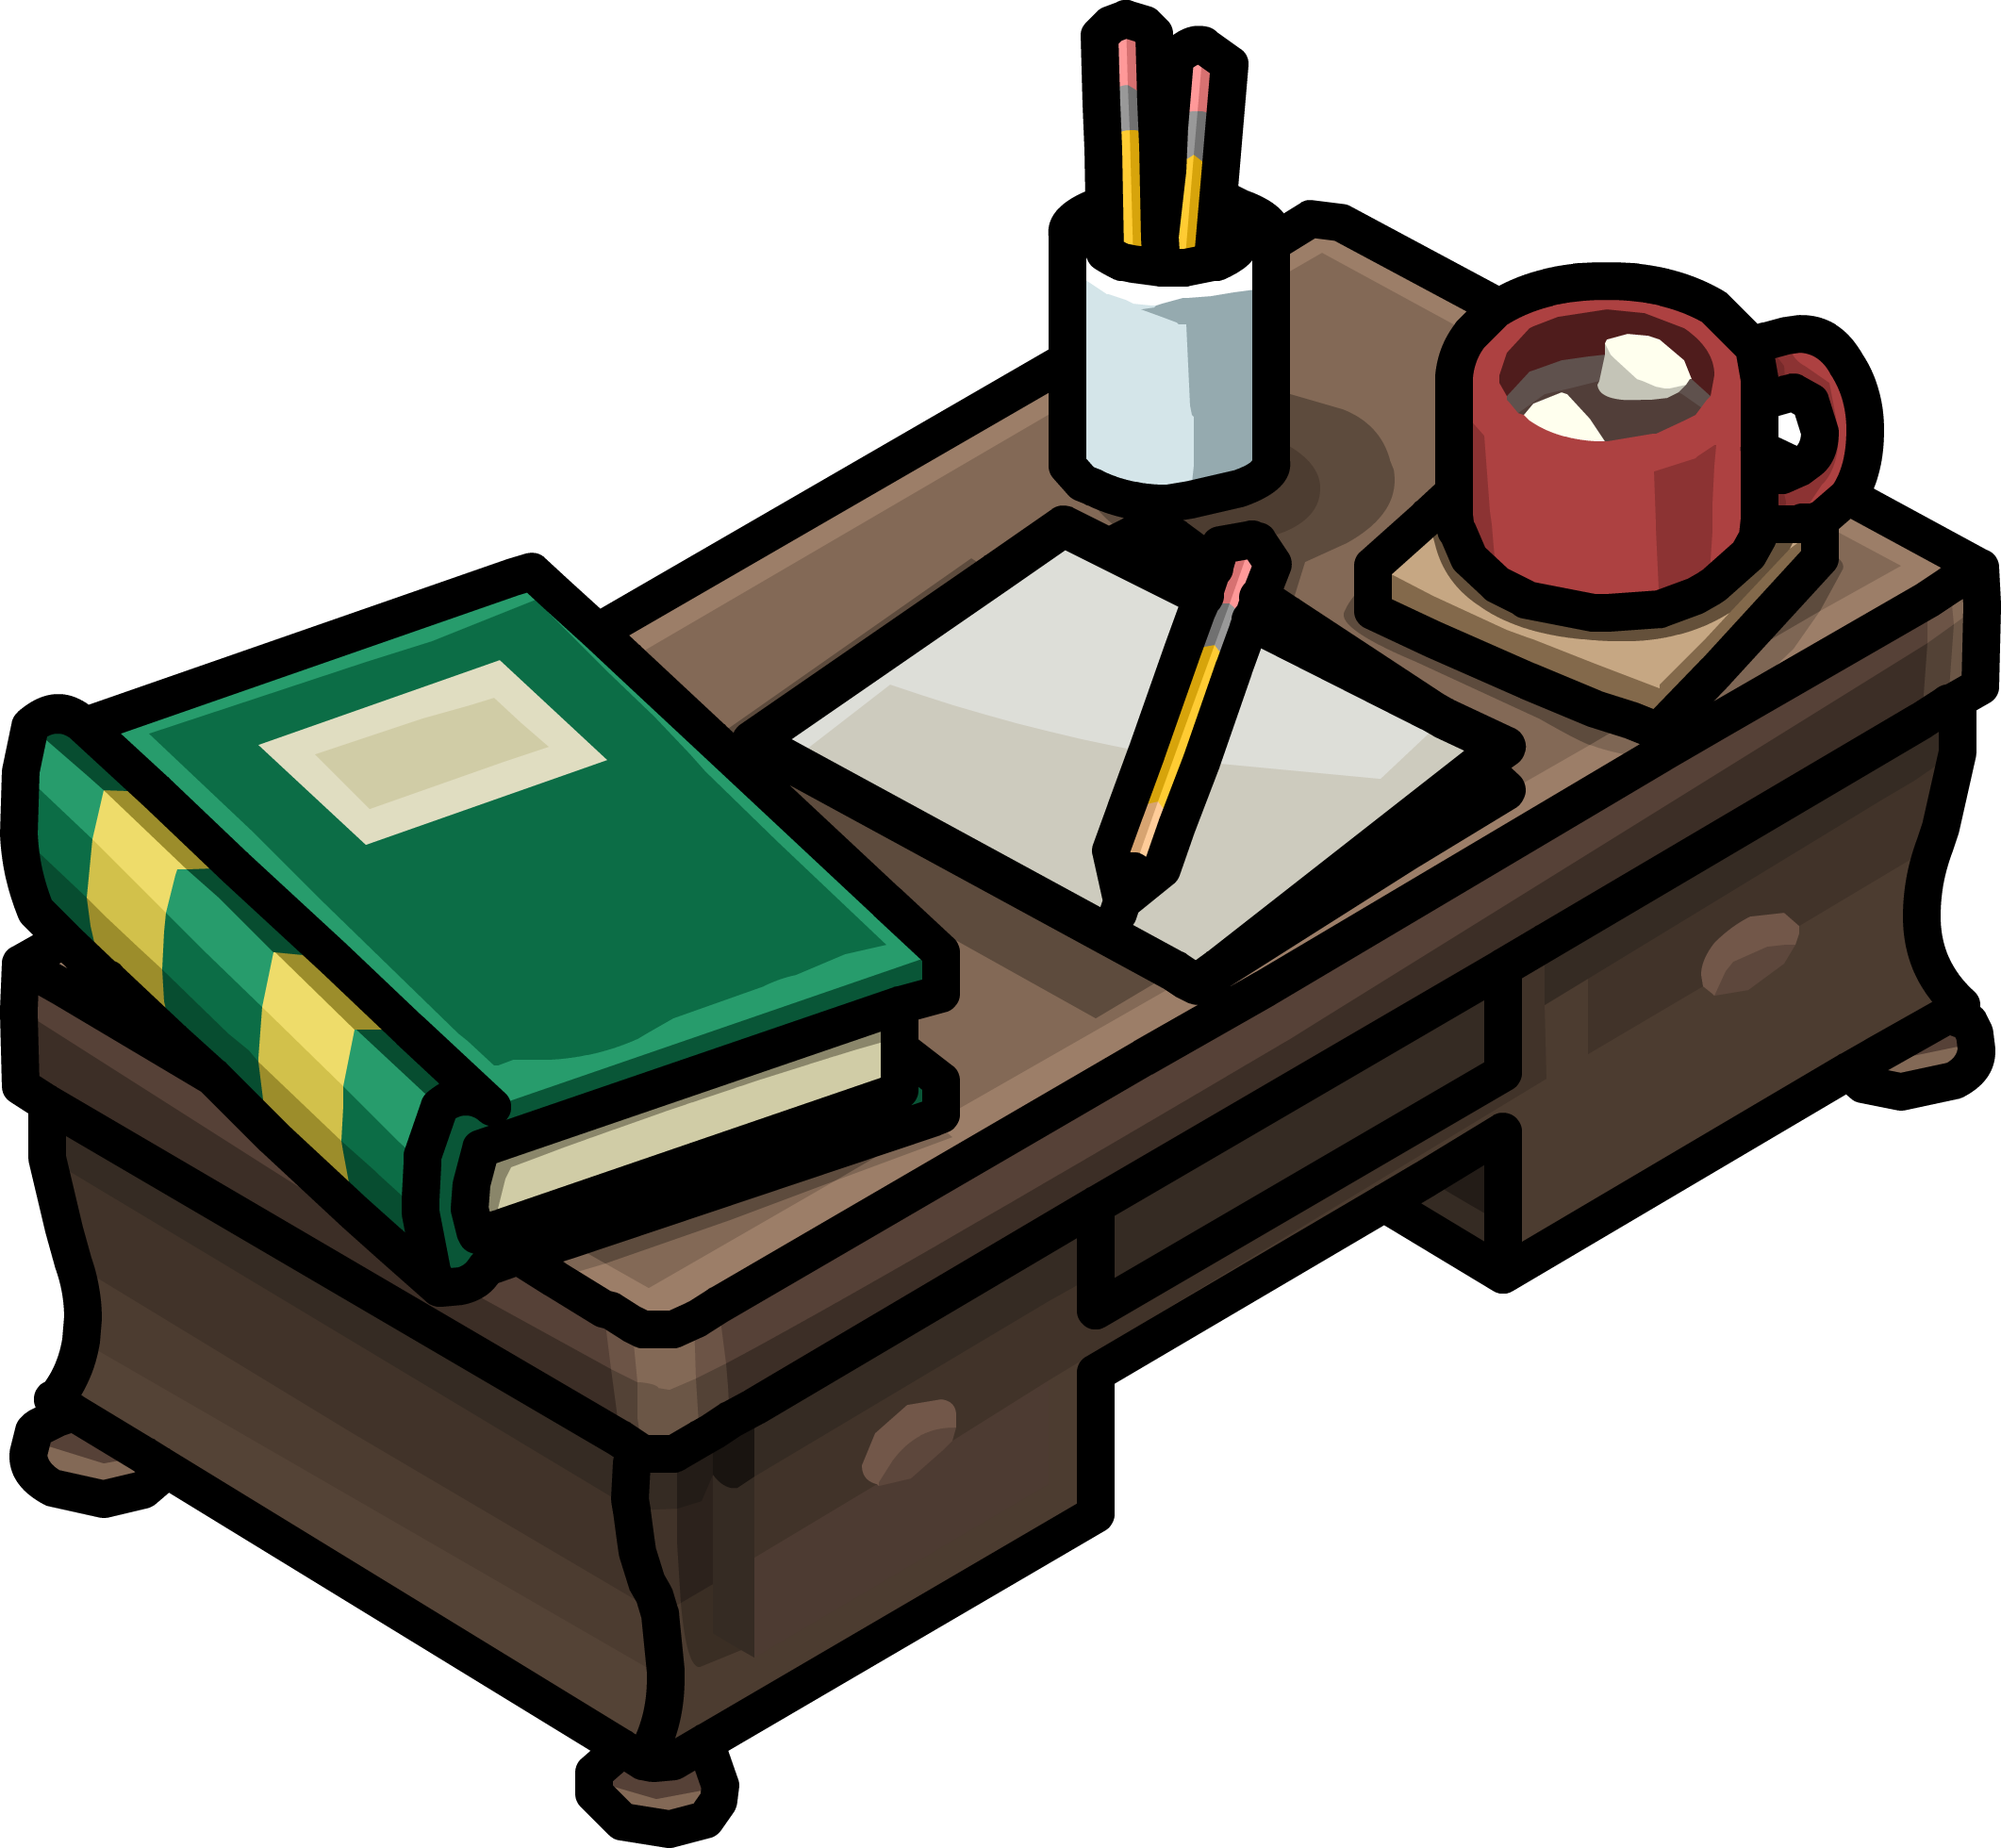 Image Teacher S Desk Icon Png Club Penguin Wiki The Free Editable Encyclopedia About Club